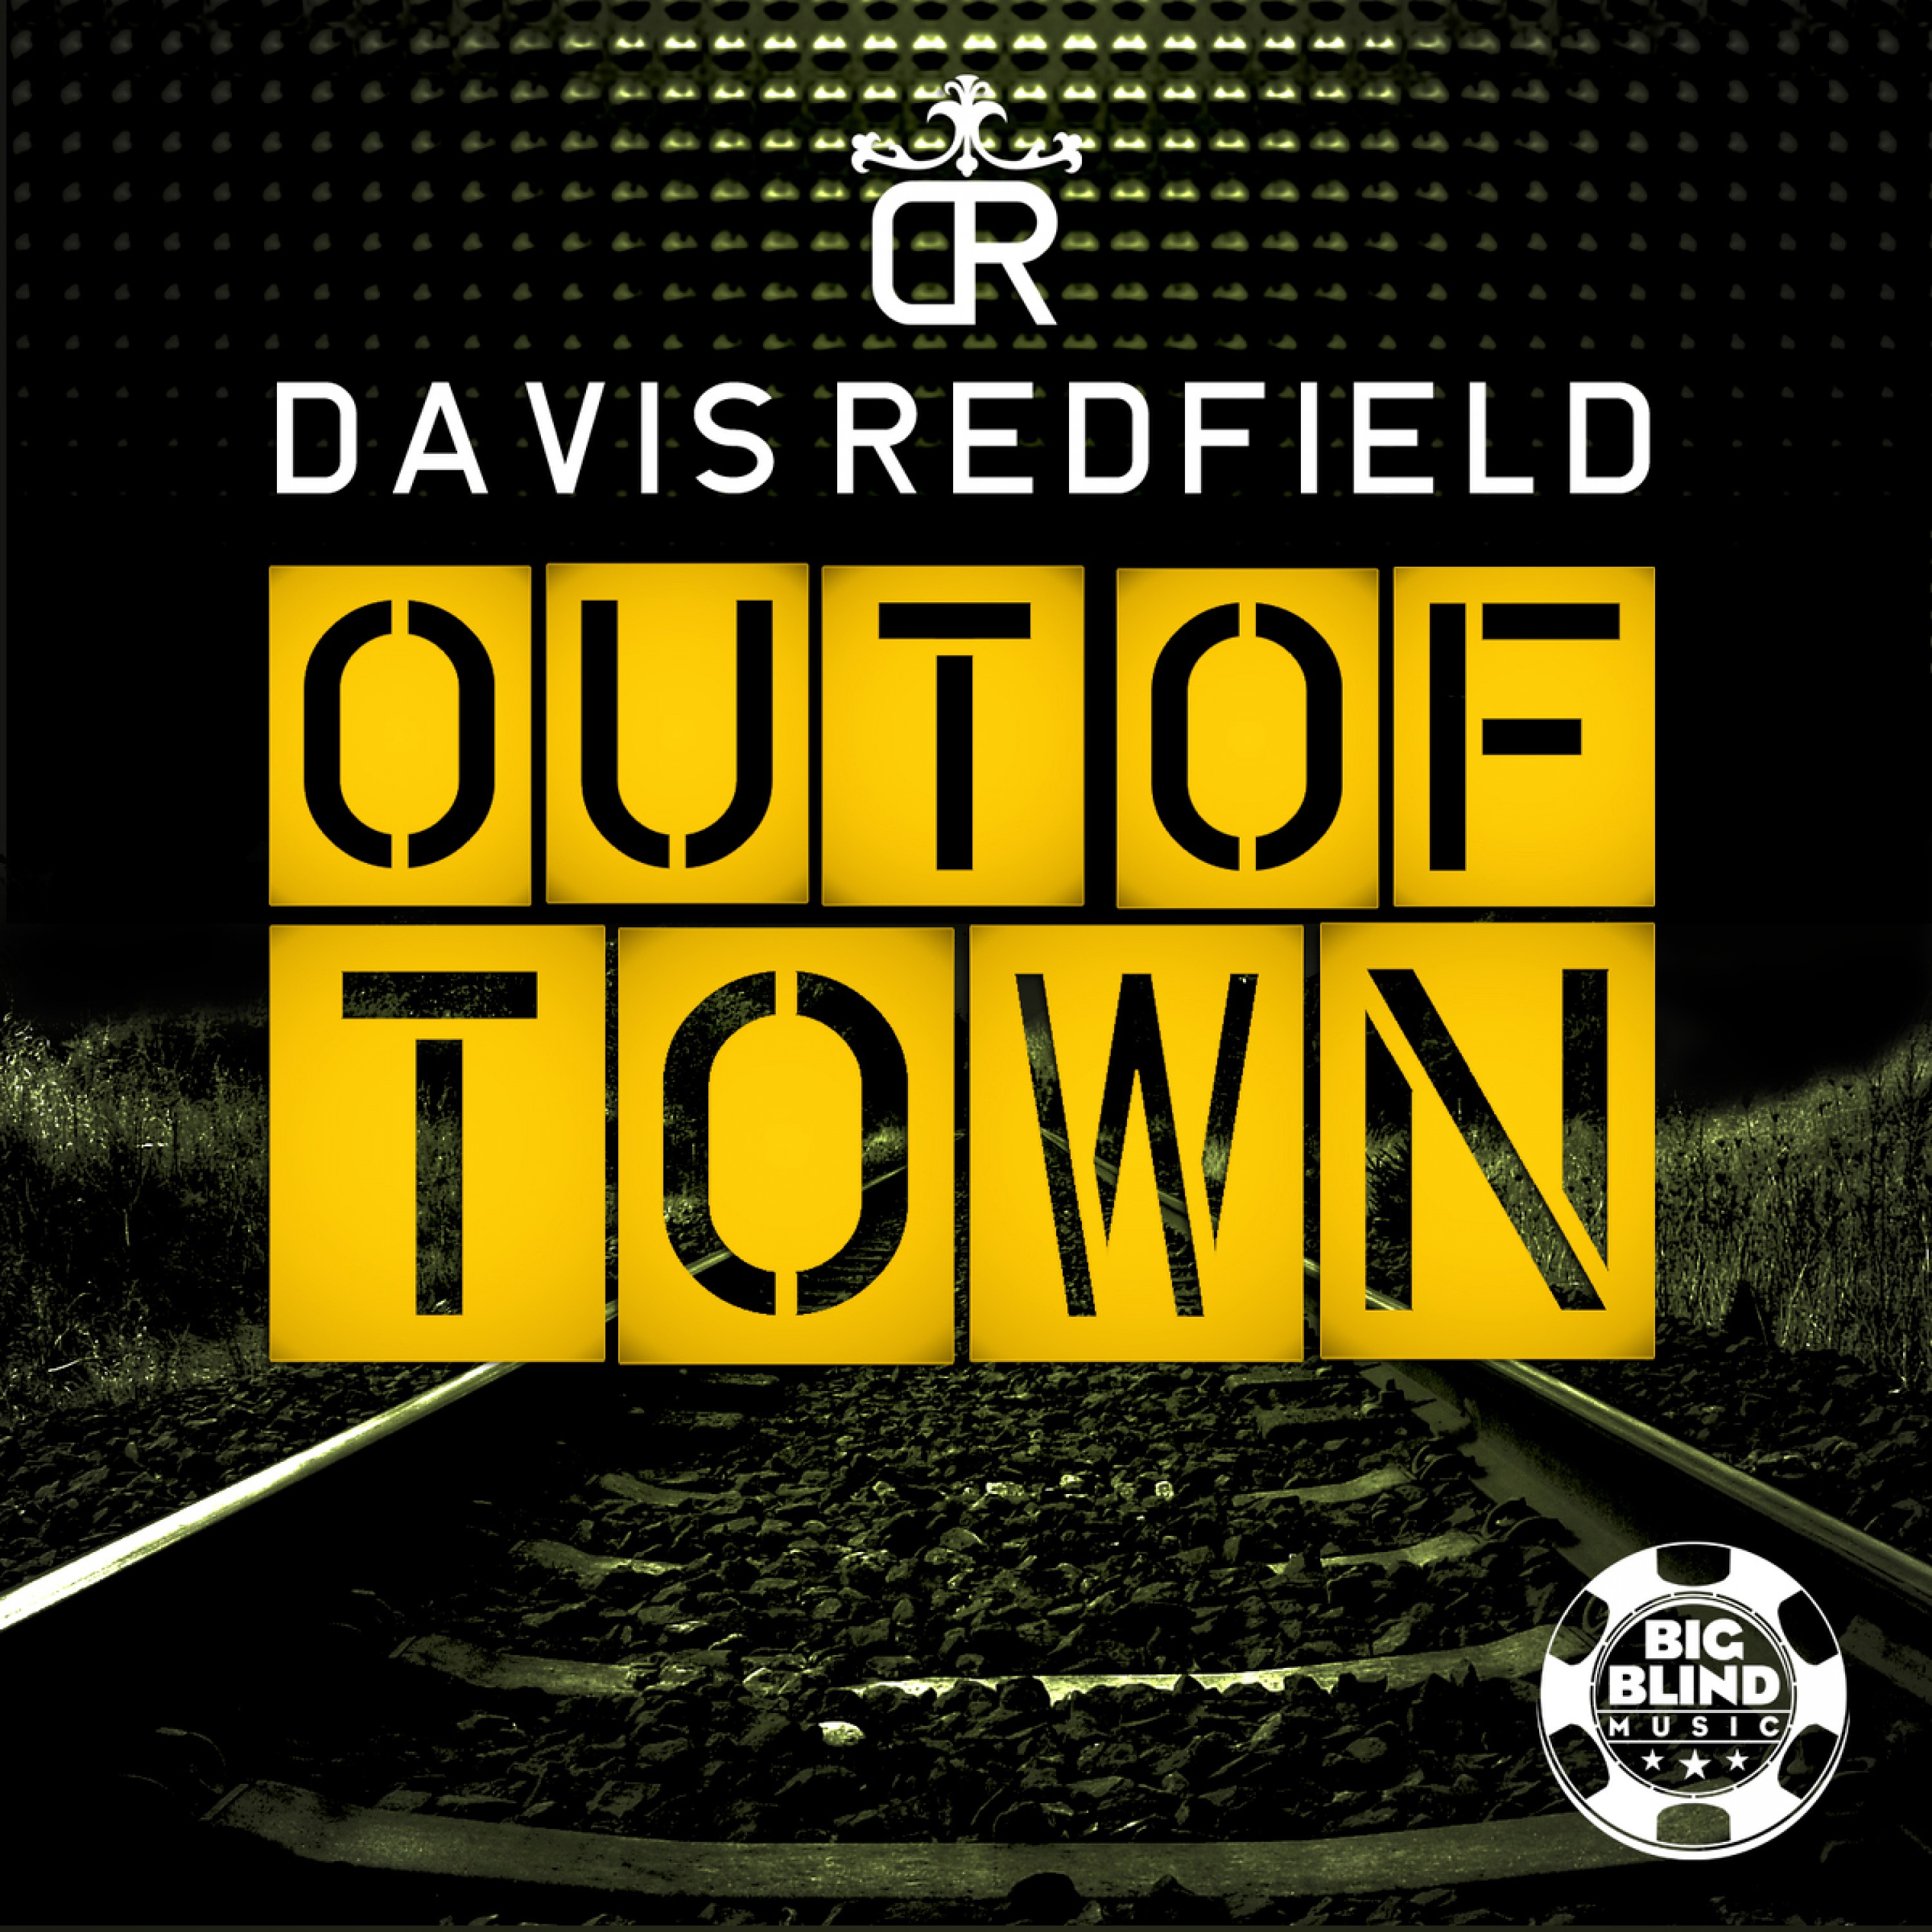 Out of Town (Dub Mix Edit)